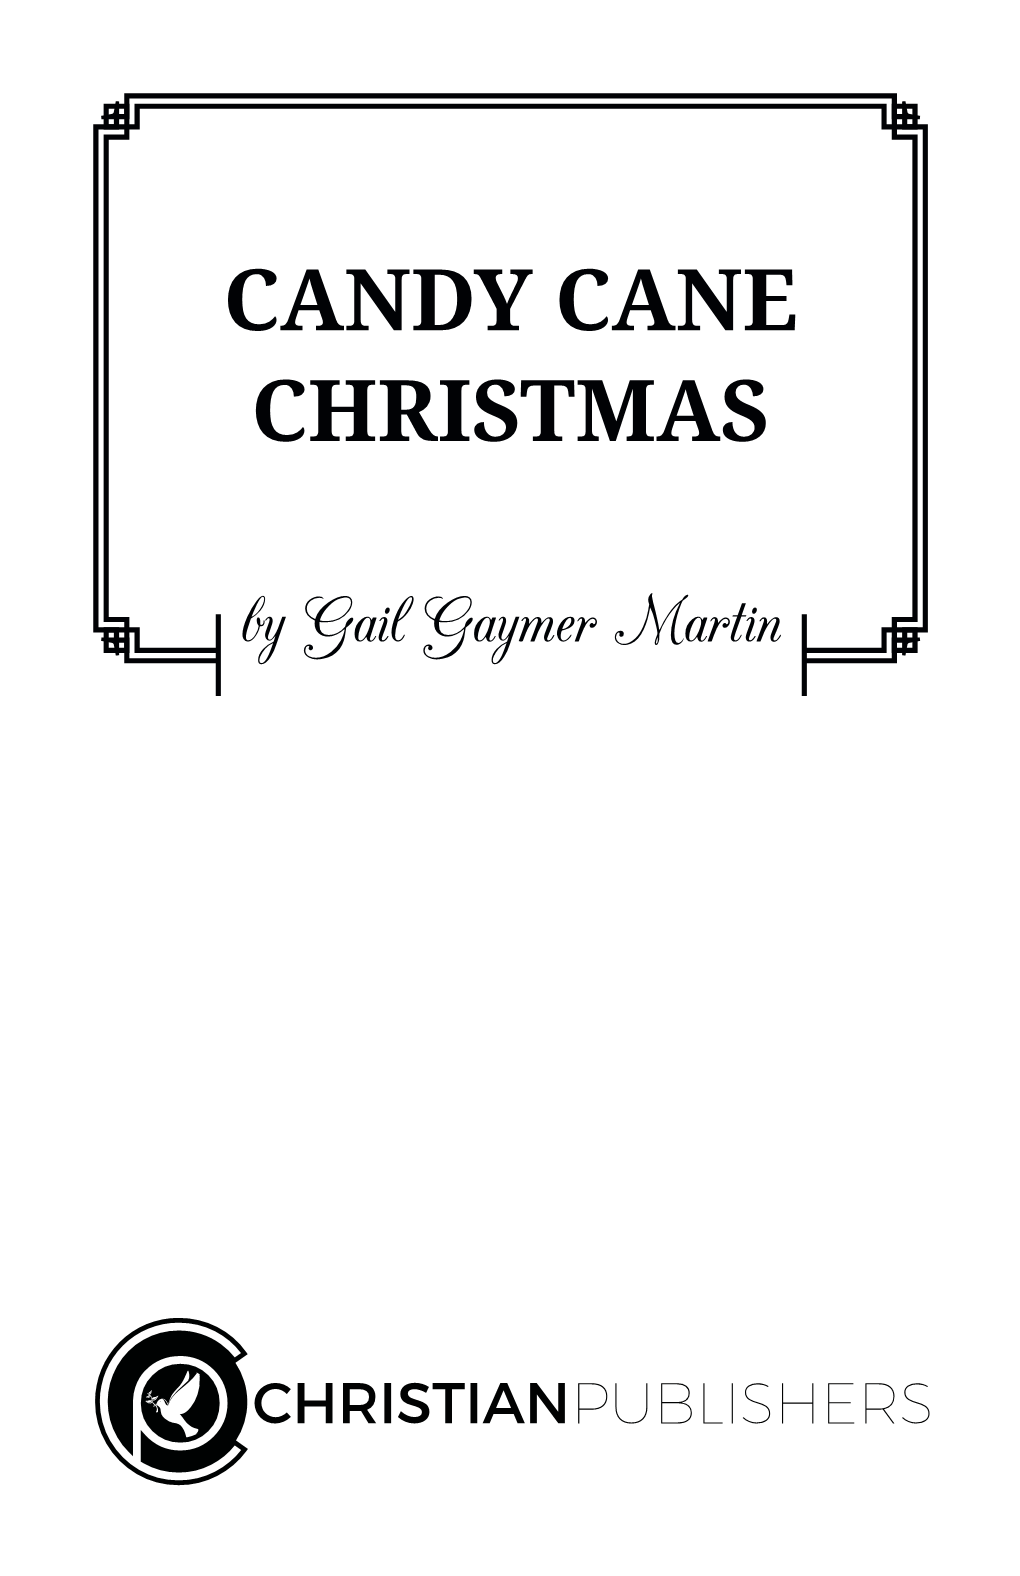 CANDY CANE CHRISTMAS by Gail Gaymer Martin Copyright Notice